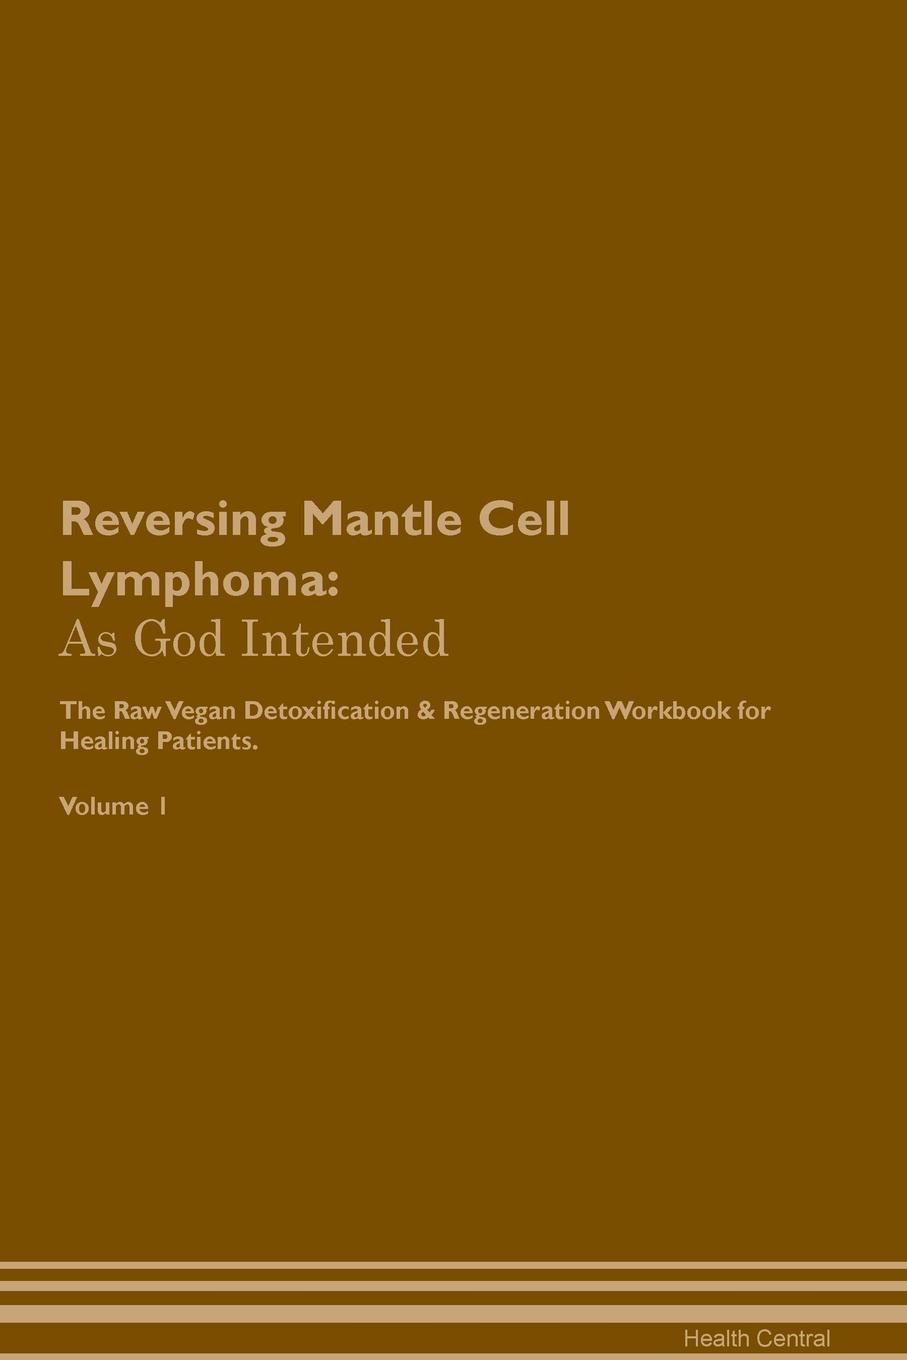 фото Reversing Mantle Cell Lymphoma. As God Intended The Raw Vegan Plant-Based Detoxification & Regeneration Workbook for Healing Patients. Volume 1